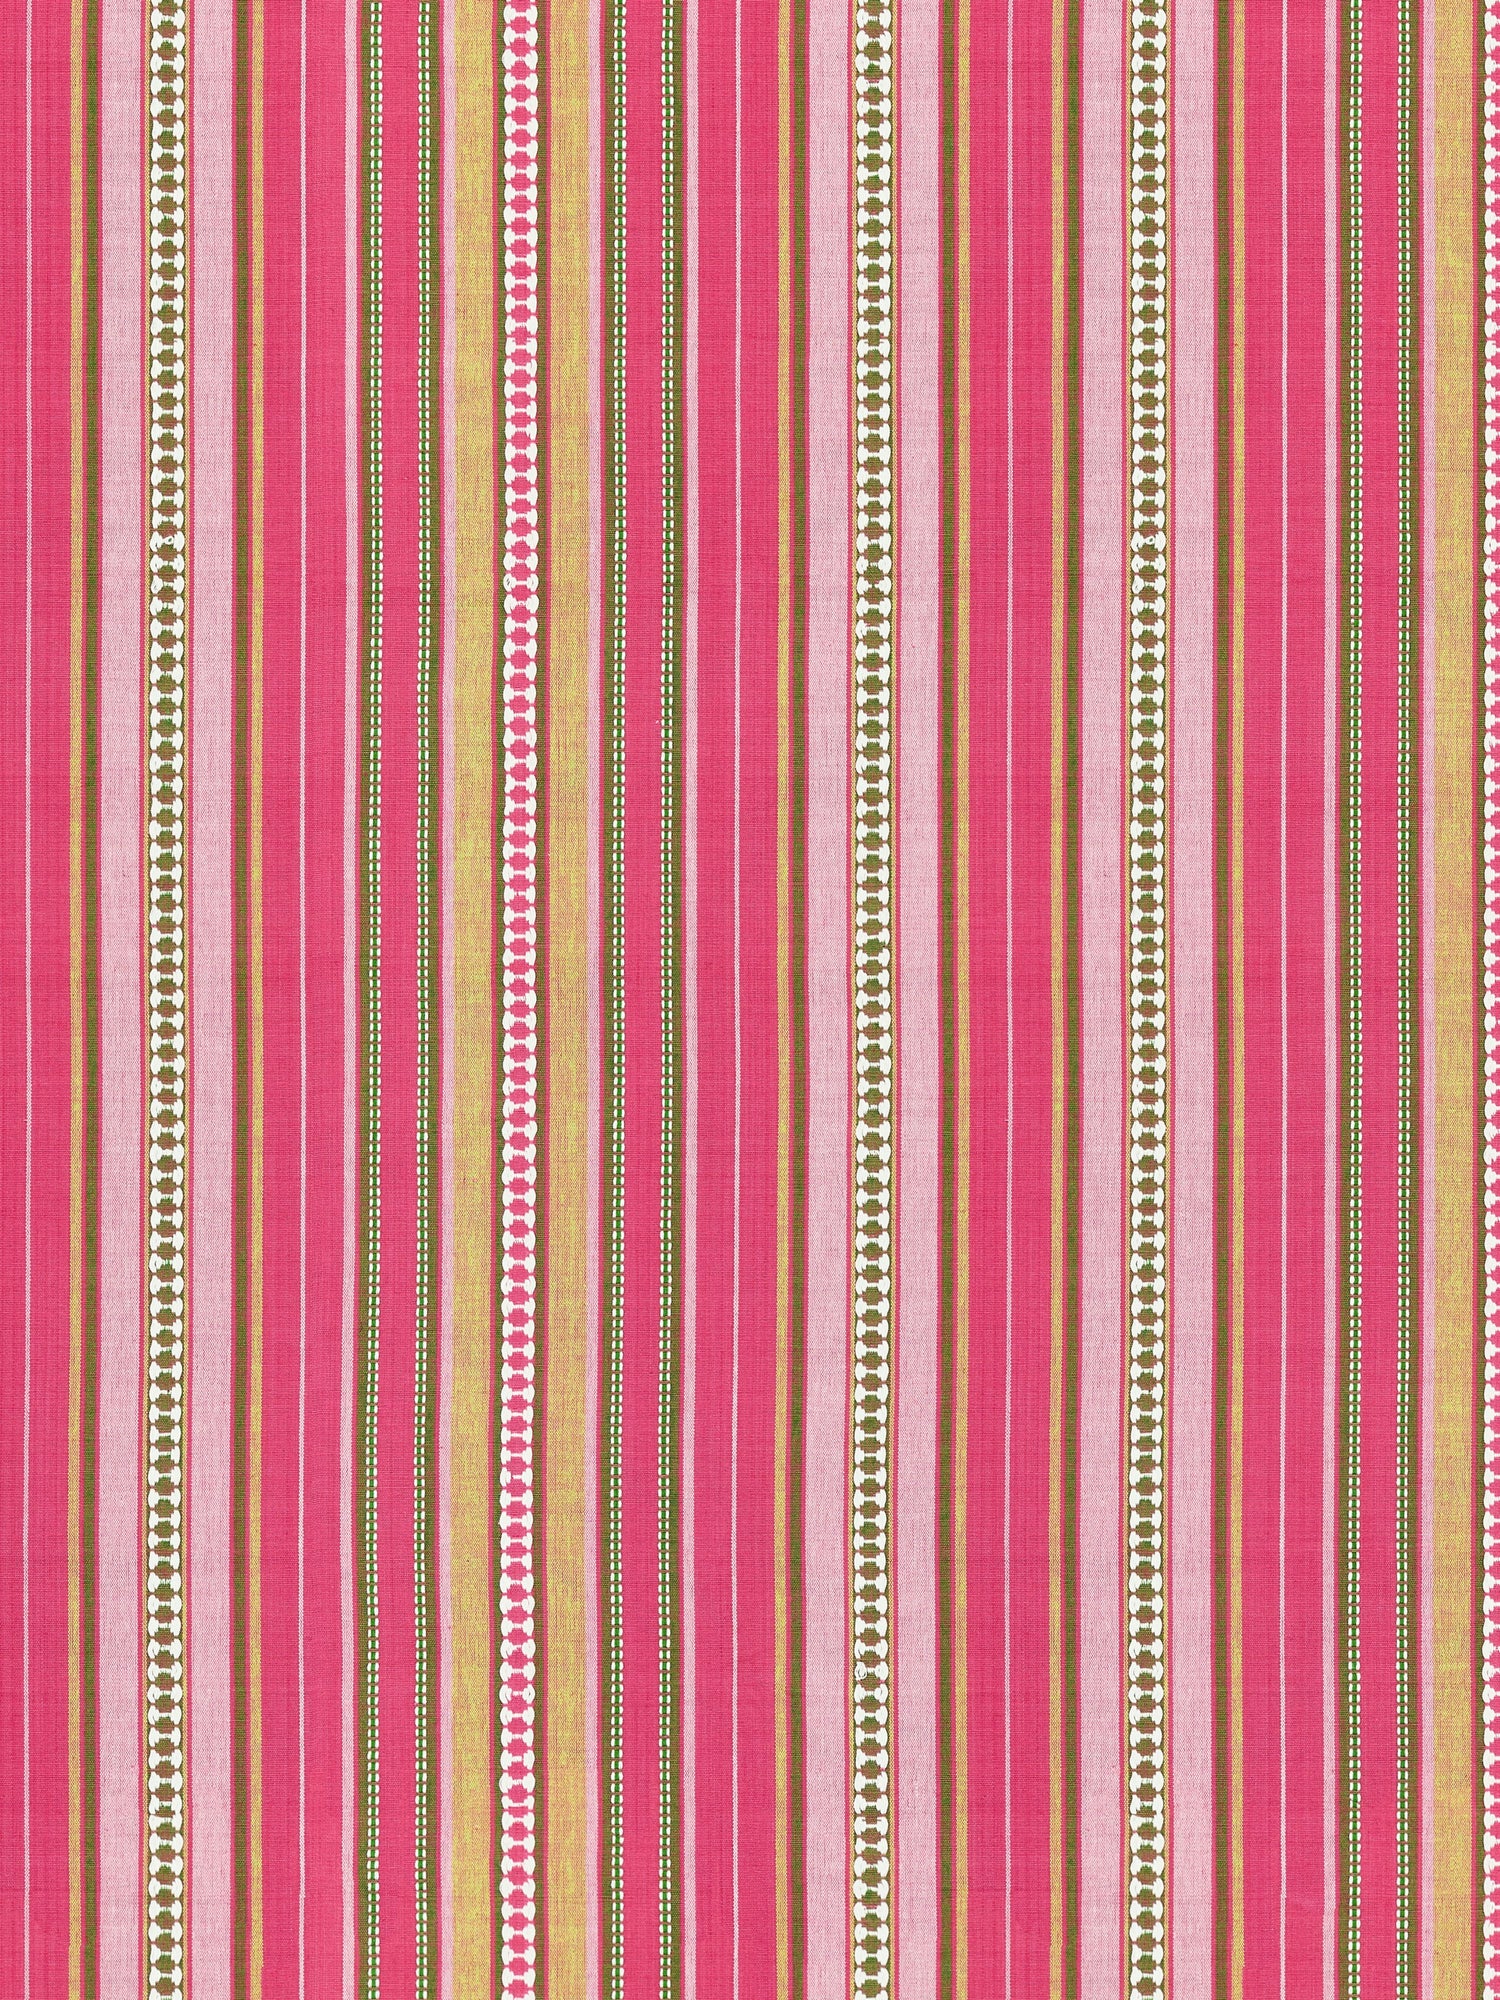 Nile Stripe fabric in rose garden color - pattern number SC 000327253 - by Scalamandre in the Scalamandre Fabrics Book 1 collection